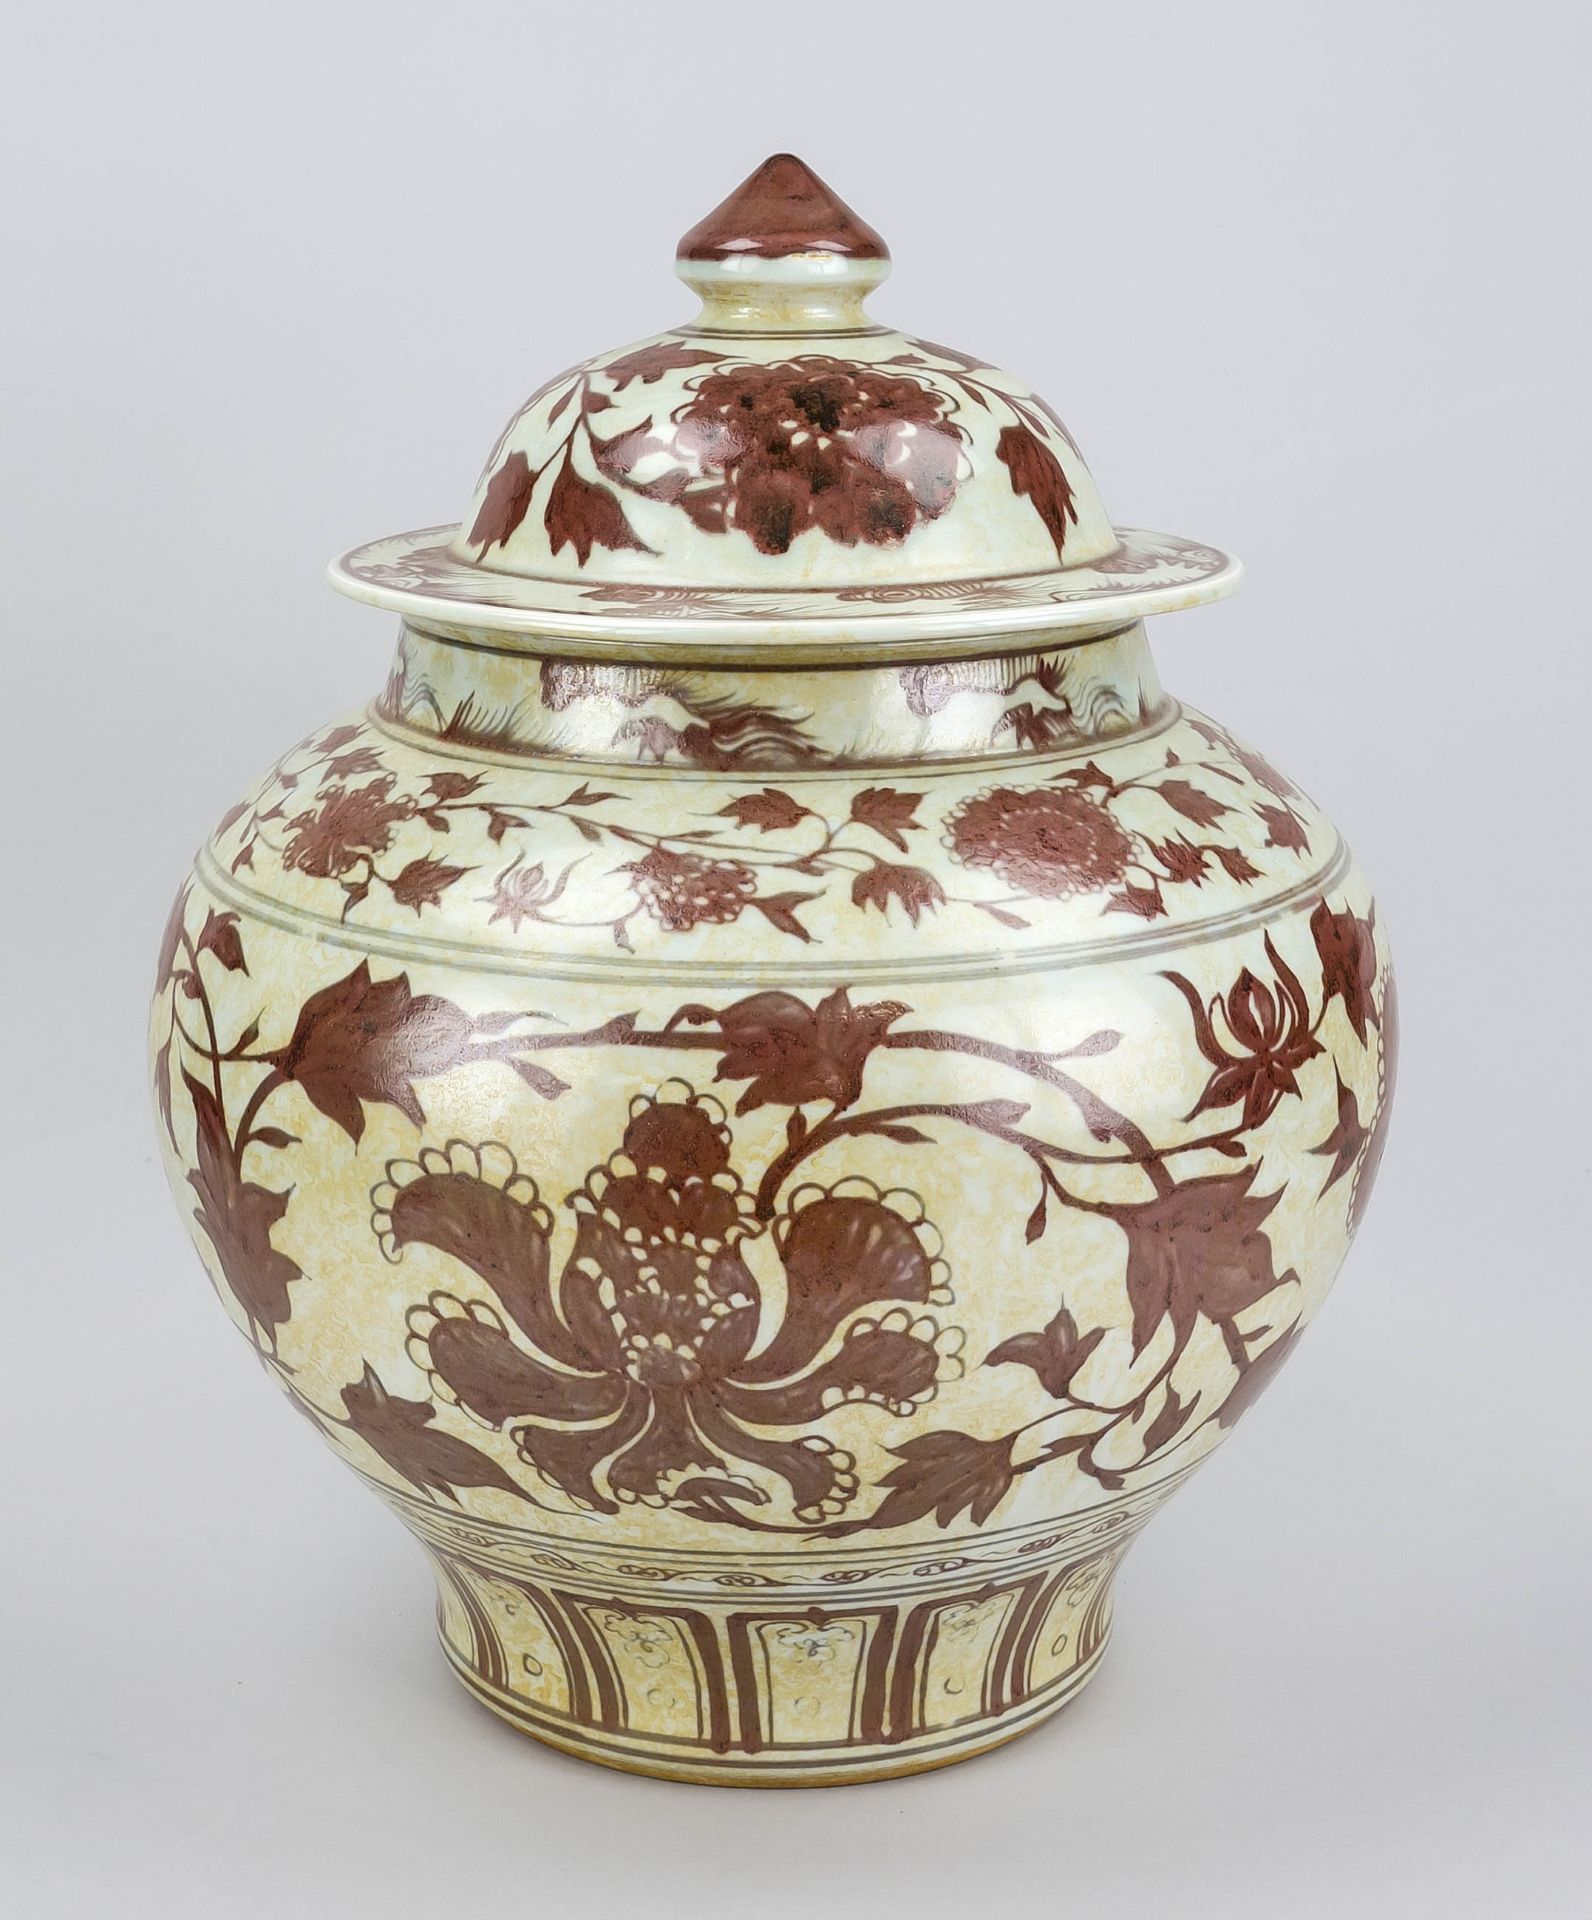 Large lidded vase with copper-red decoration, China. Bellied body of thick body with lotus